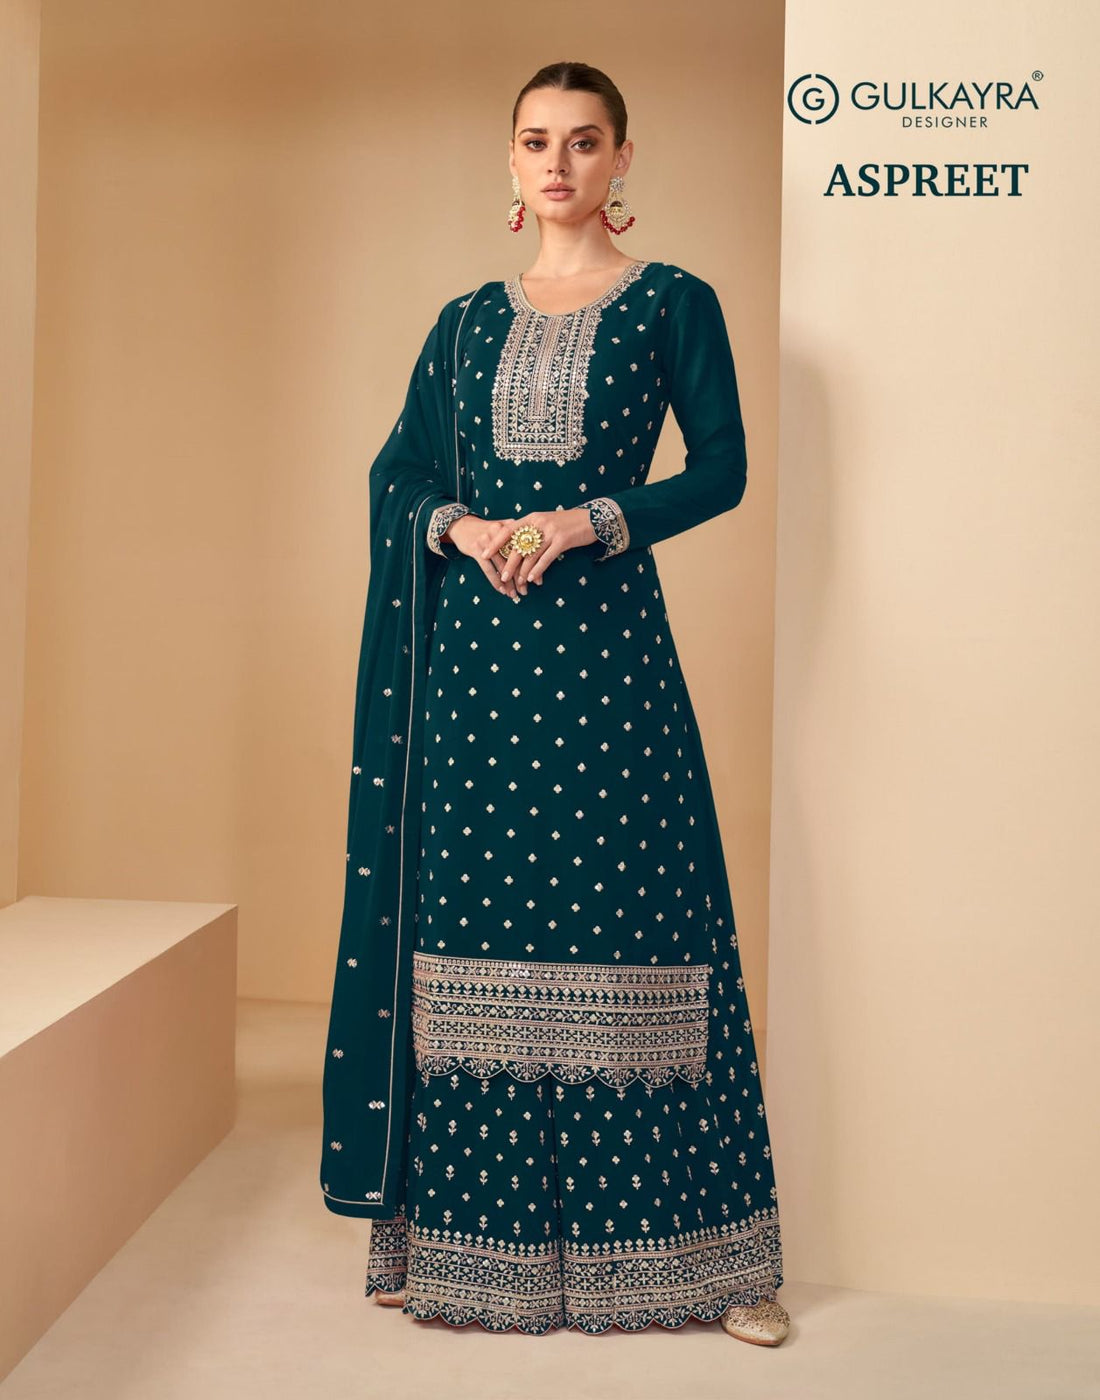 GULKAYRA DESIGNER ASPREET 7172 SERIES SUIT Anant Tex Exports Private Limited